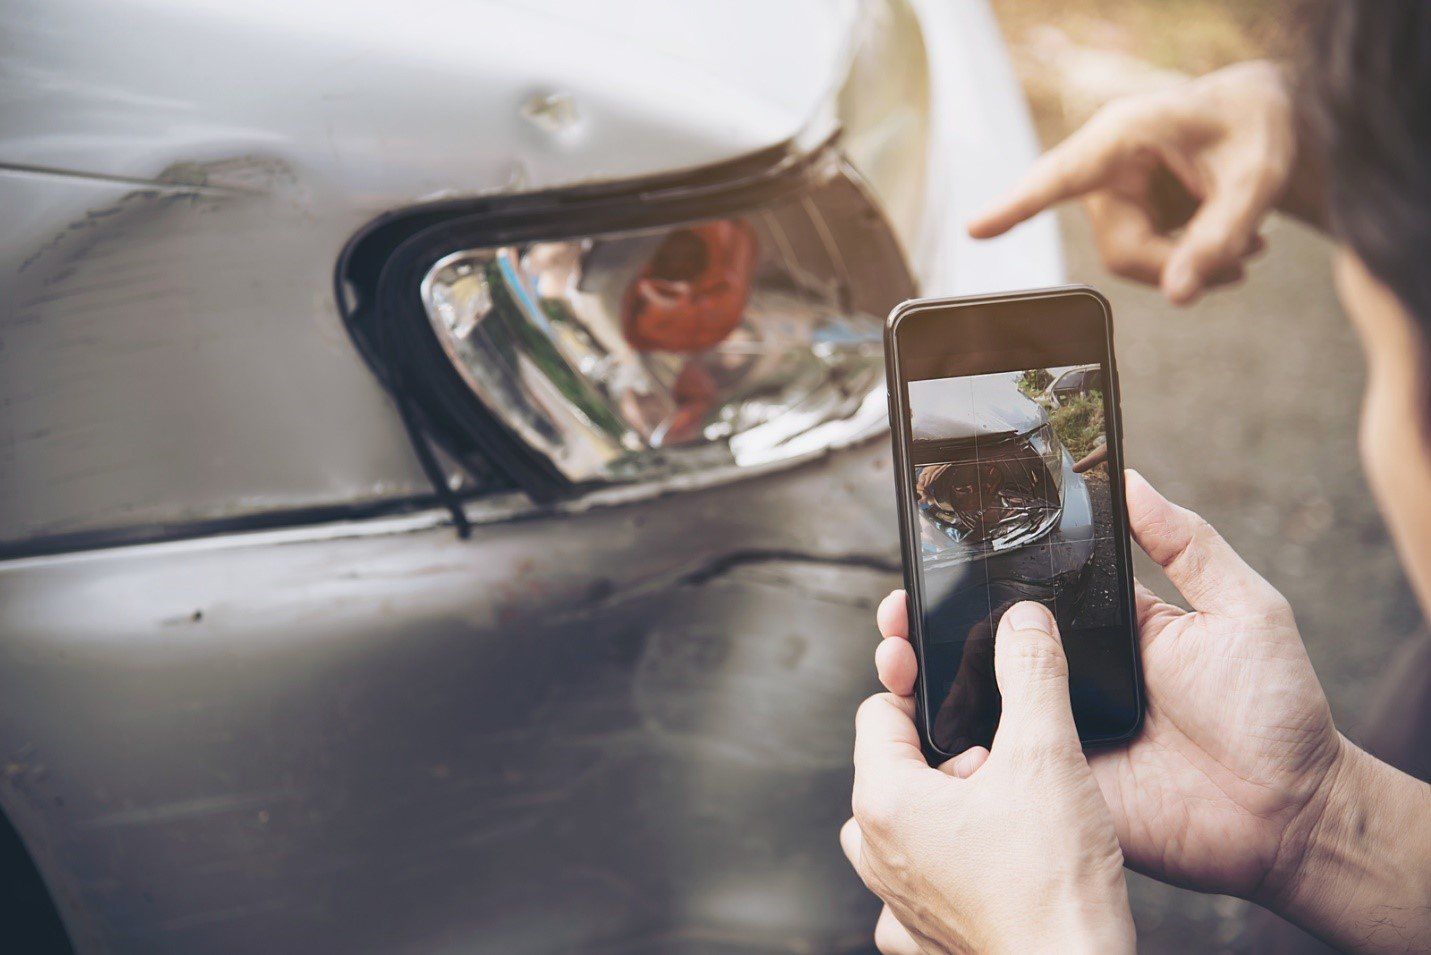 A person taking a video of a damaged car after an accident.